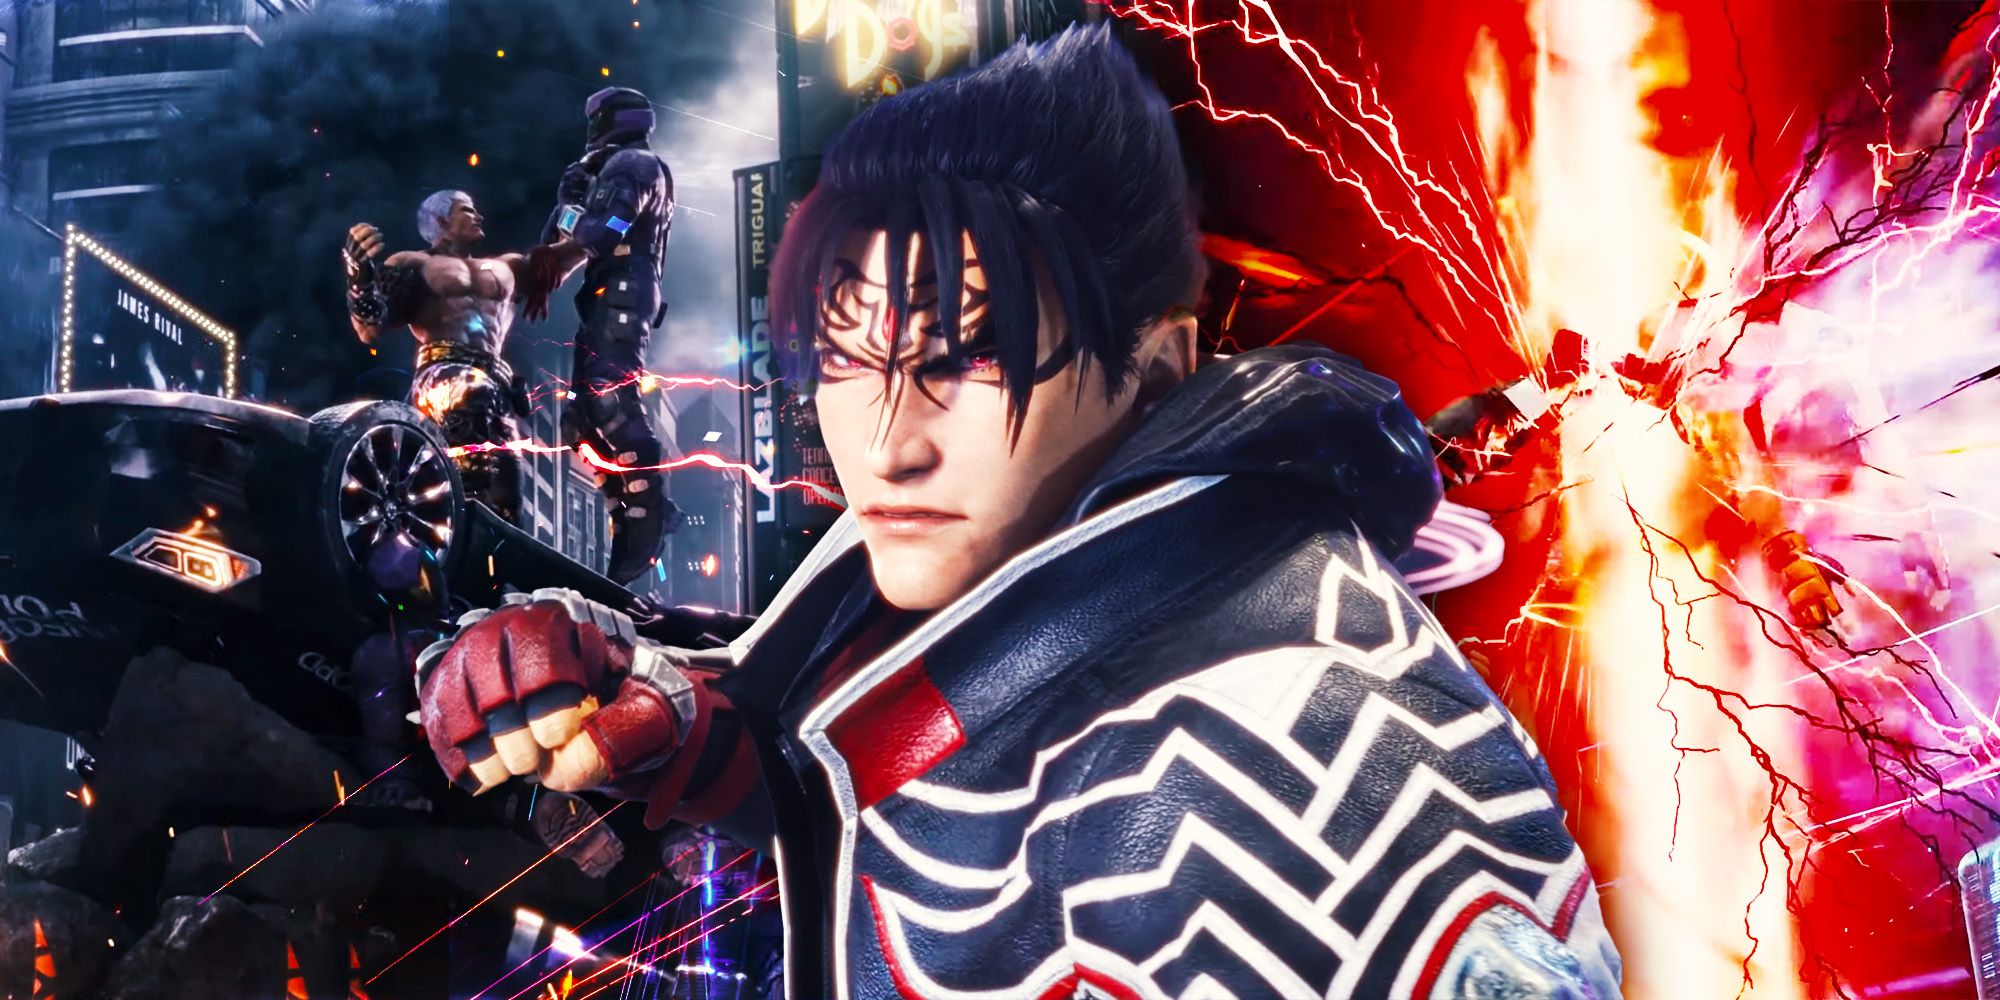 Image shows Jin staring determined with markings appearing on his forhead. Behind him is Bryan holding up an enemy and on the other side is a flash of red lightning.